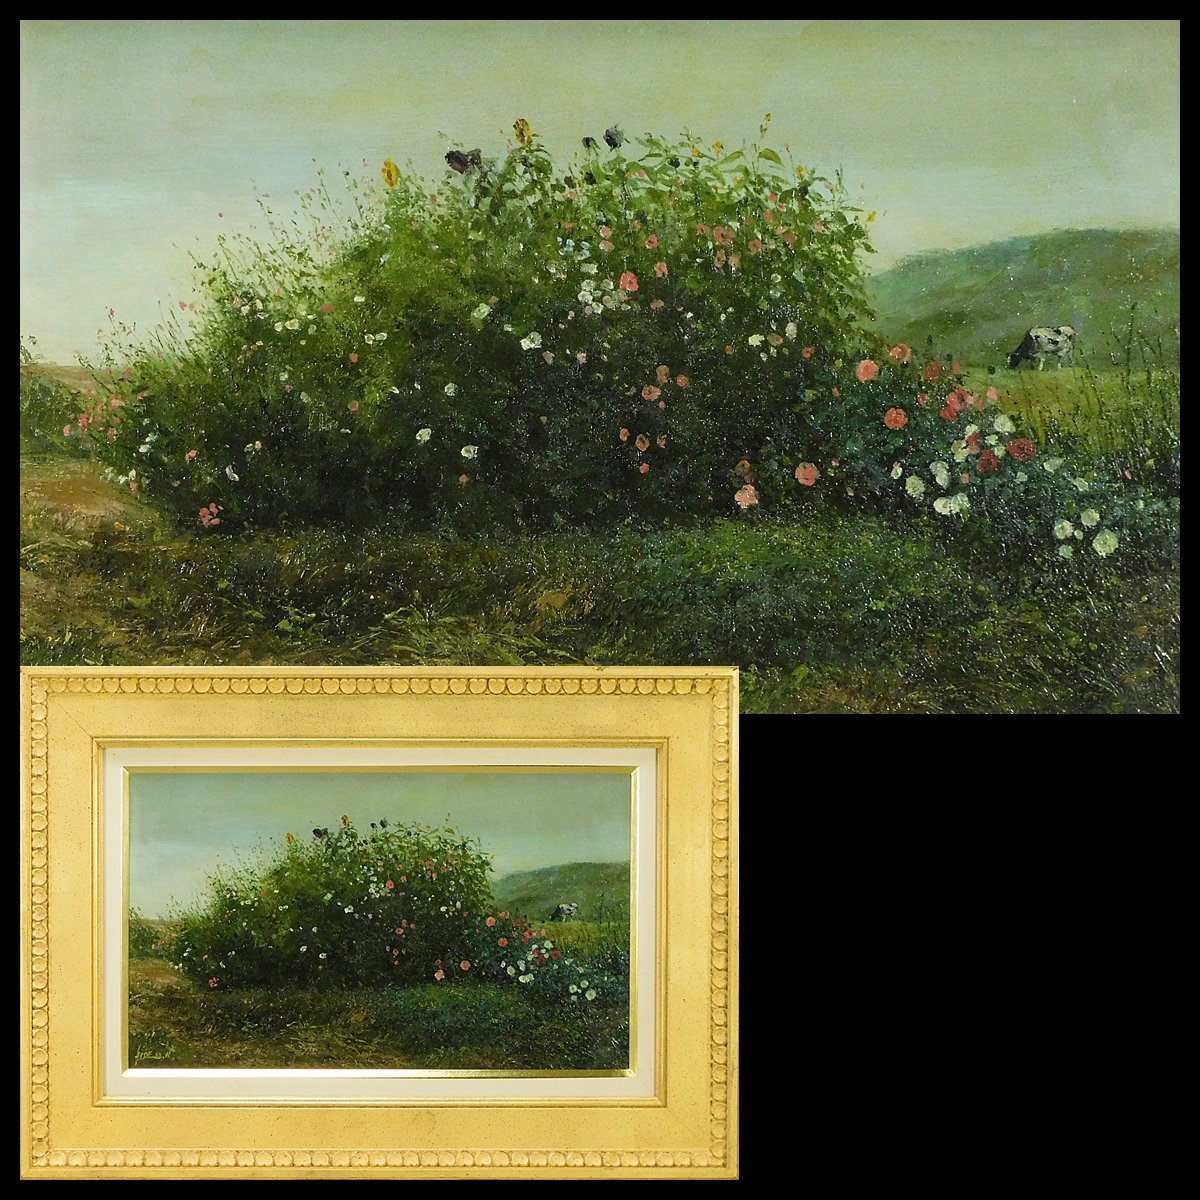 Hideo Nakamura Wildflowers M8 Oil Painting Framed Exclusive Tattoo Realism Japan Artists Federation Member Picture Story Writer Illustrator s23120105, painting, oil painting, Nature, Landscape painting